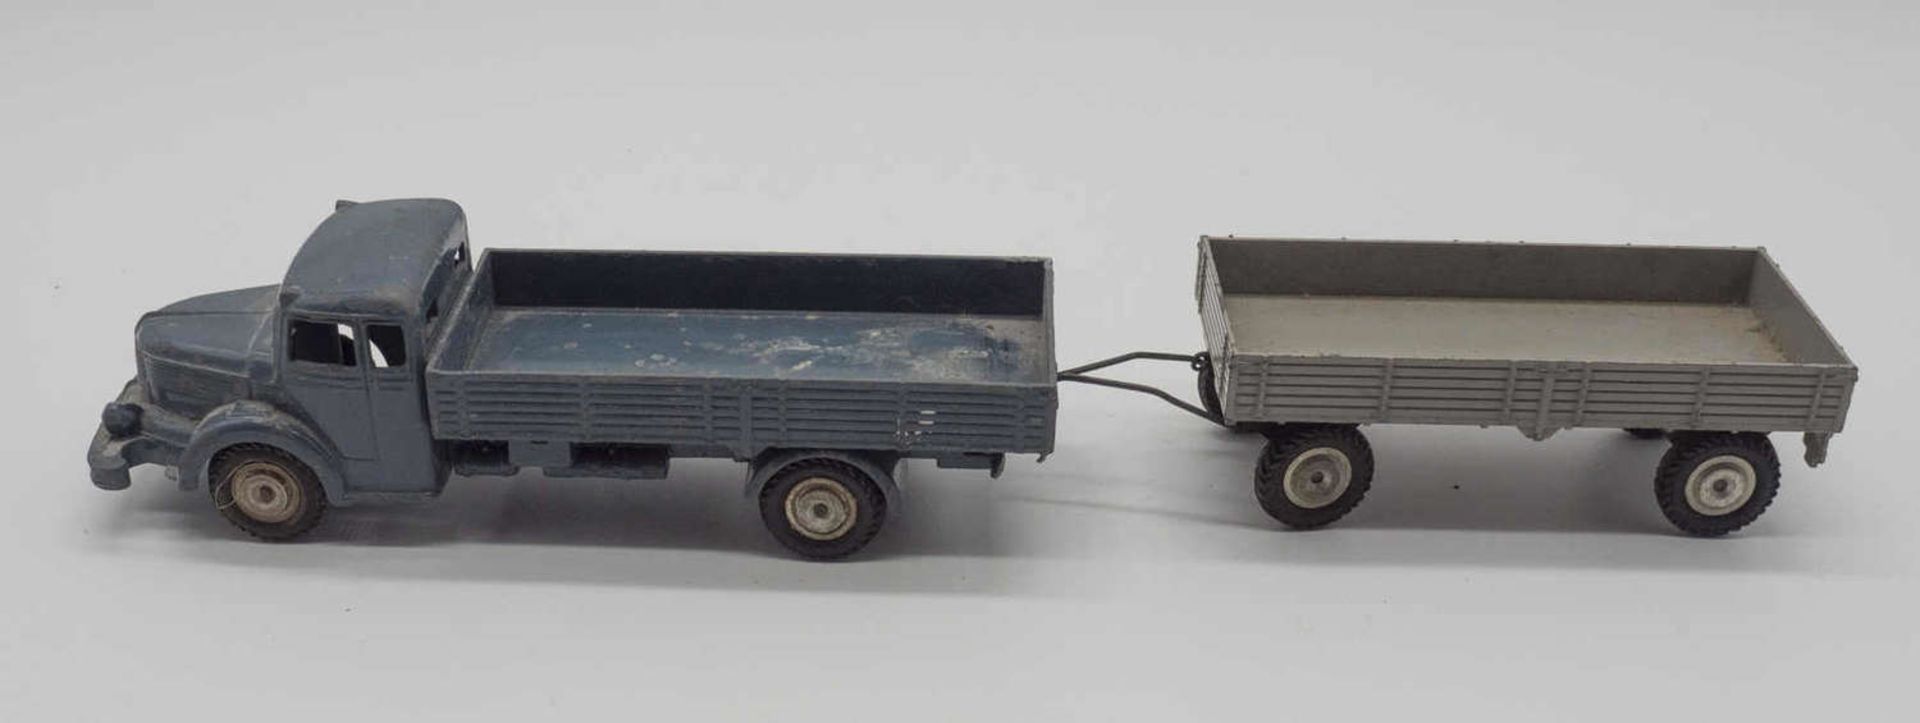 Märklin 8009 and 8012, Krupp Titan - truck and trailer. Molding. Truck with clear game. and signs of